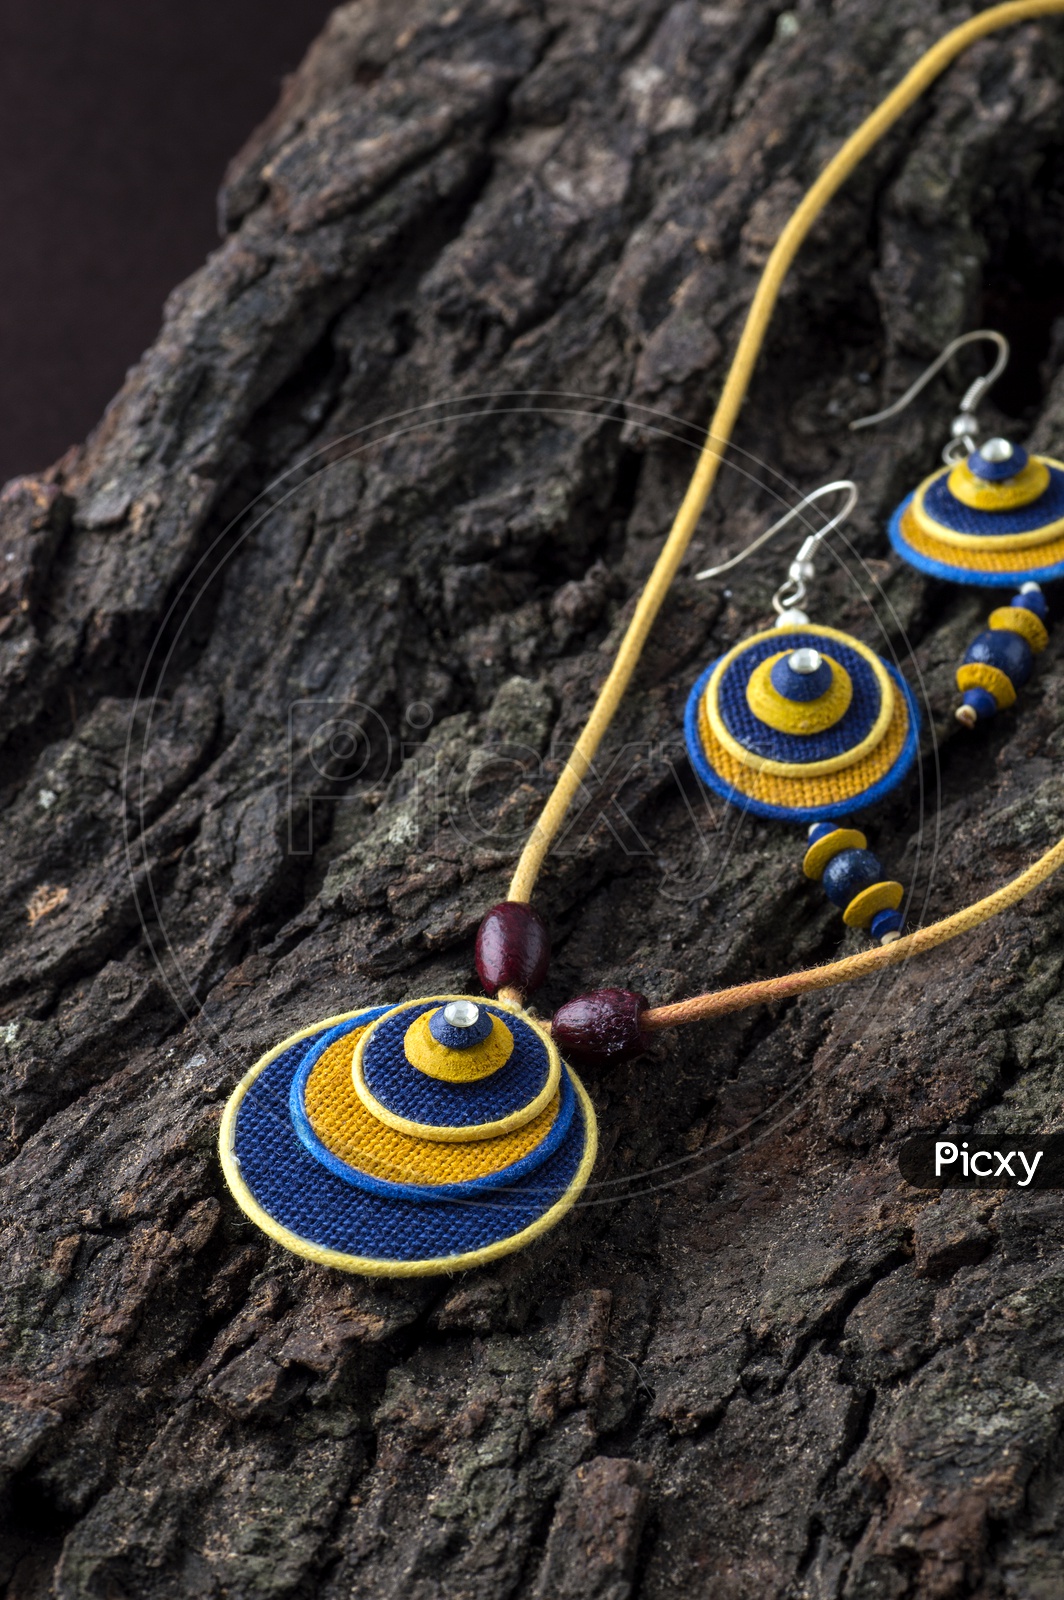 Hand crafted thread jewelry with earrings